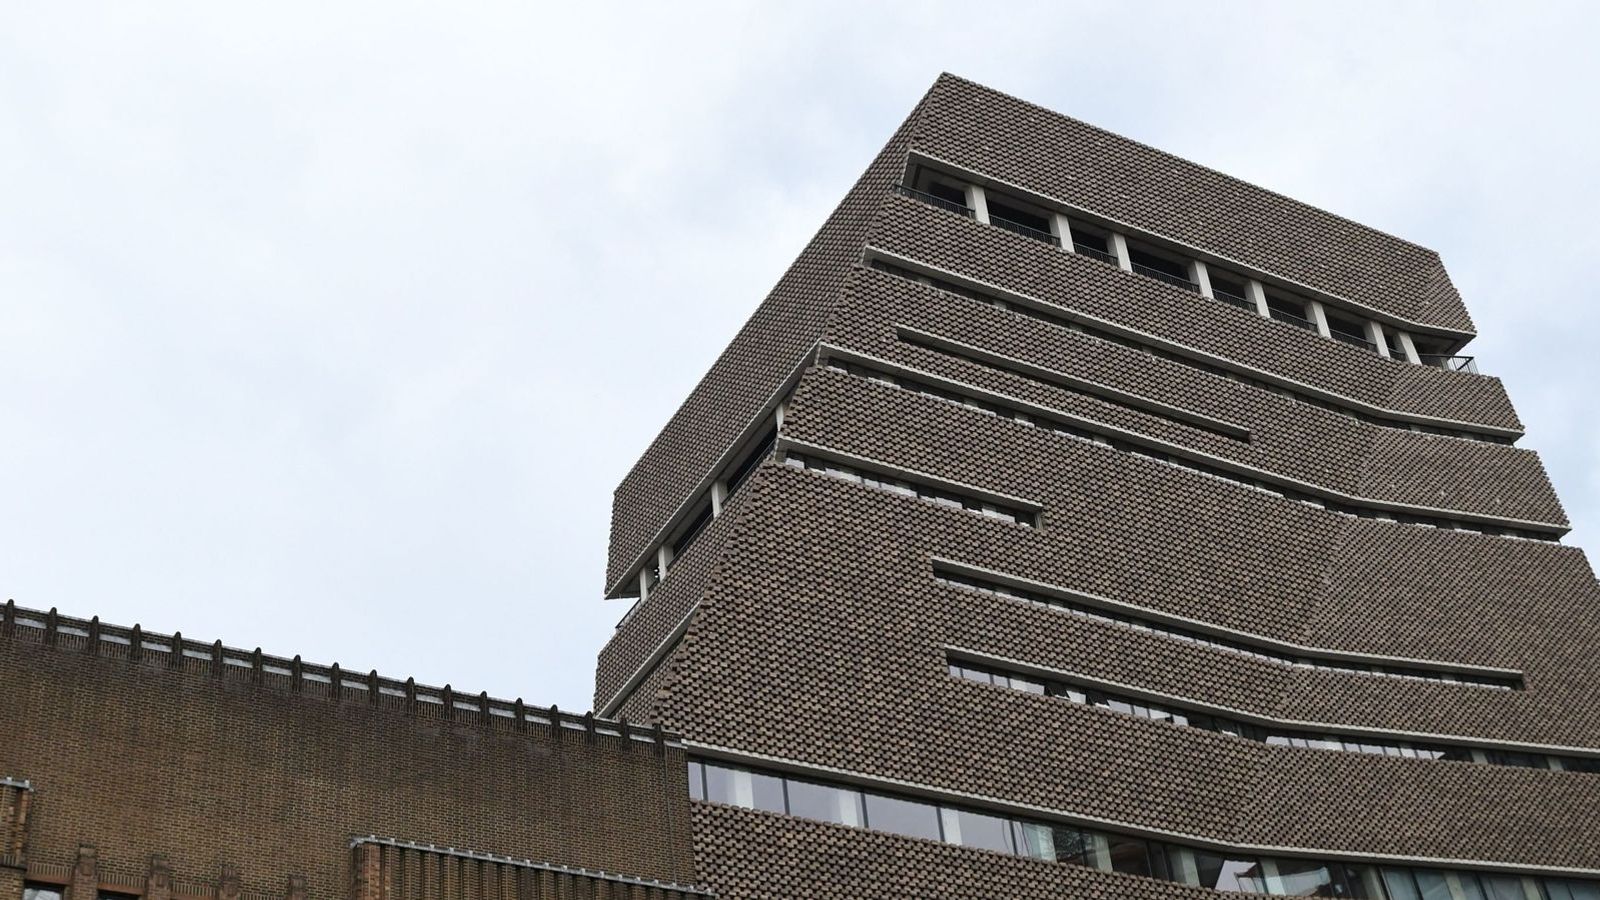 Boy thrown from 10th floor of Tate Modern walking and watching films with family again